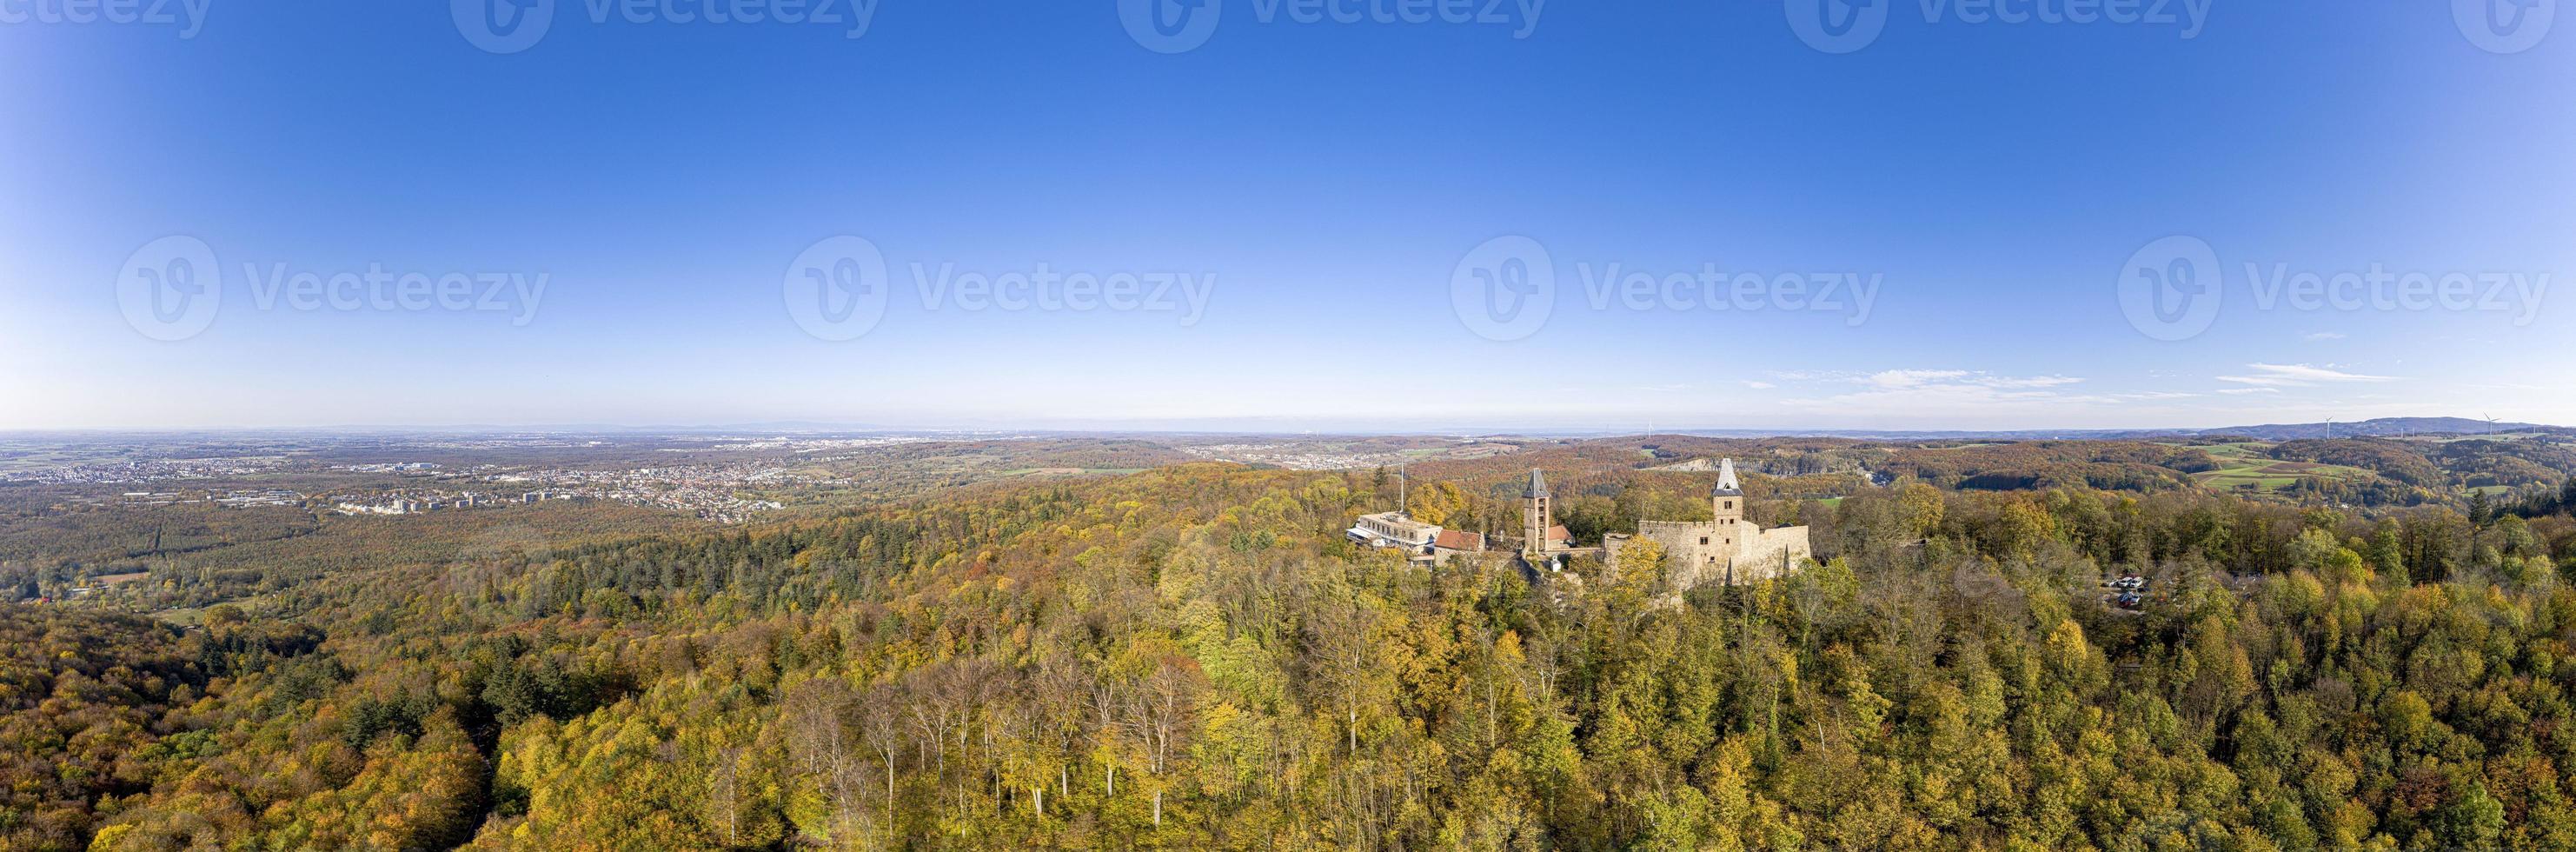 Drone photo of Frankenstein Castle near Darmstadt in Germany with a view over the Rhine-Main area in autumn